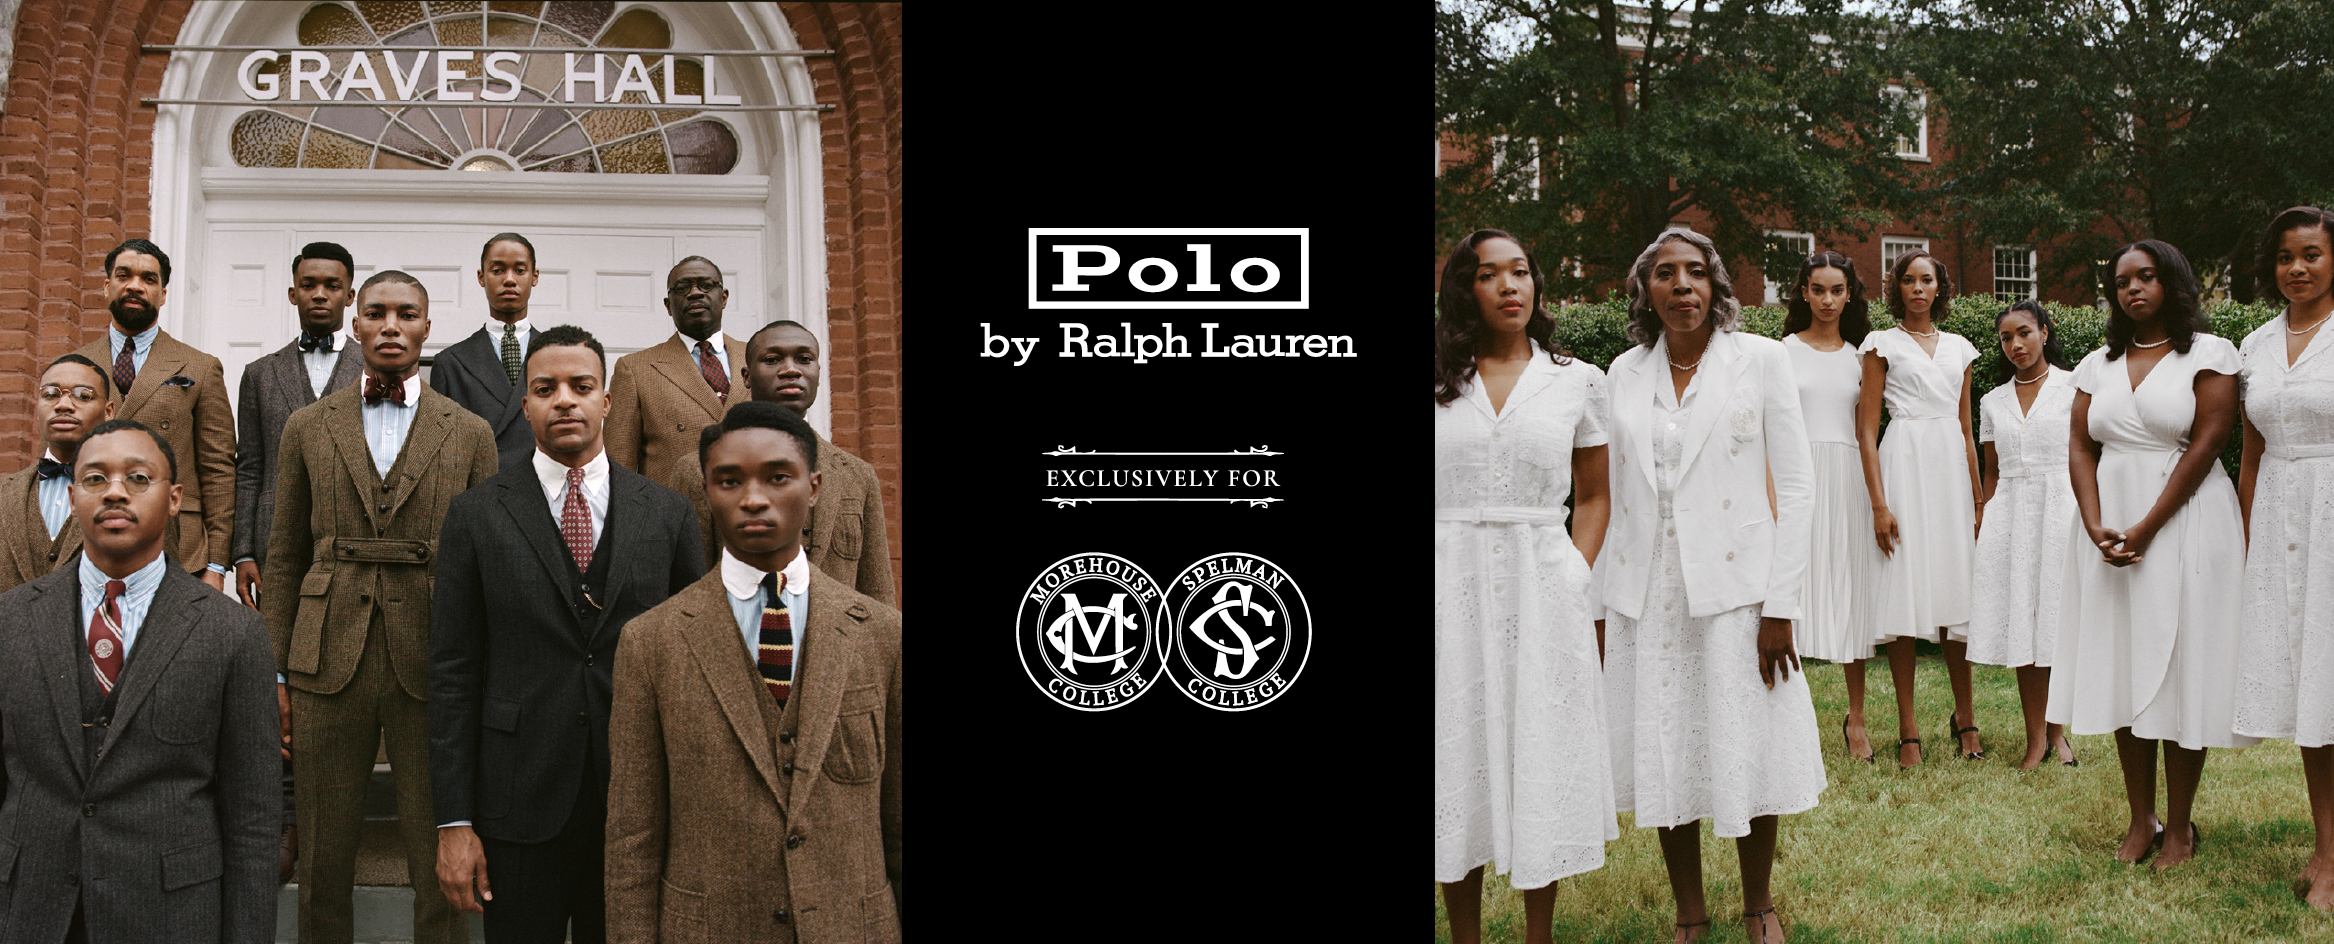 Polo Ralph Lauren Exclusively for Morehouse and Spelman Colleges Collection  Announced [Video] - Atlanta Tribune